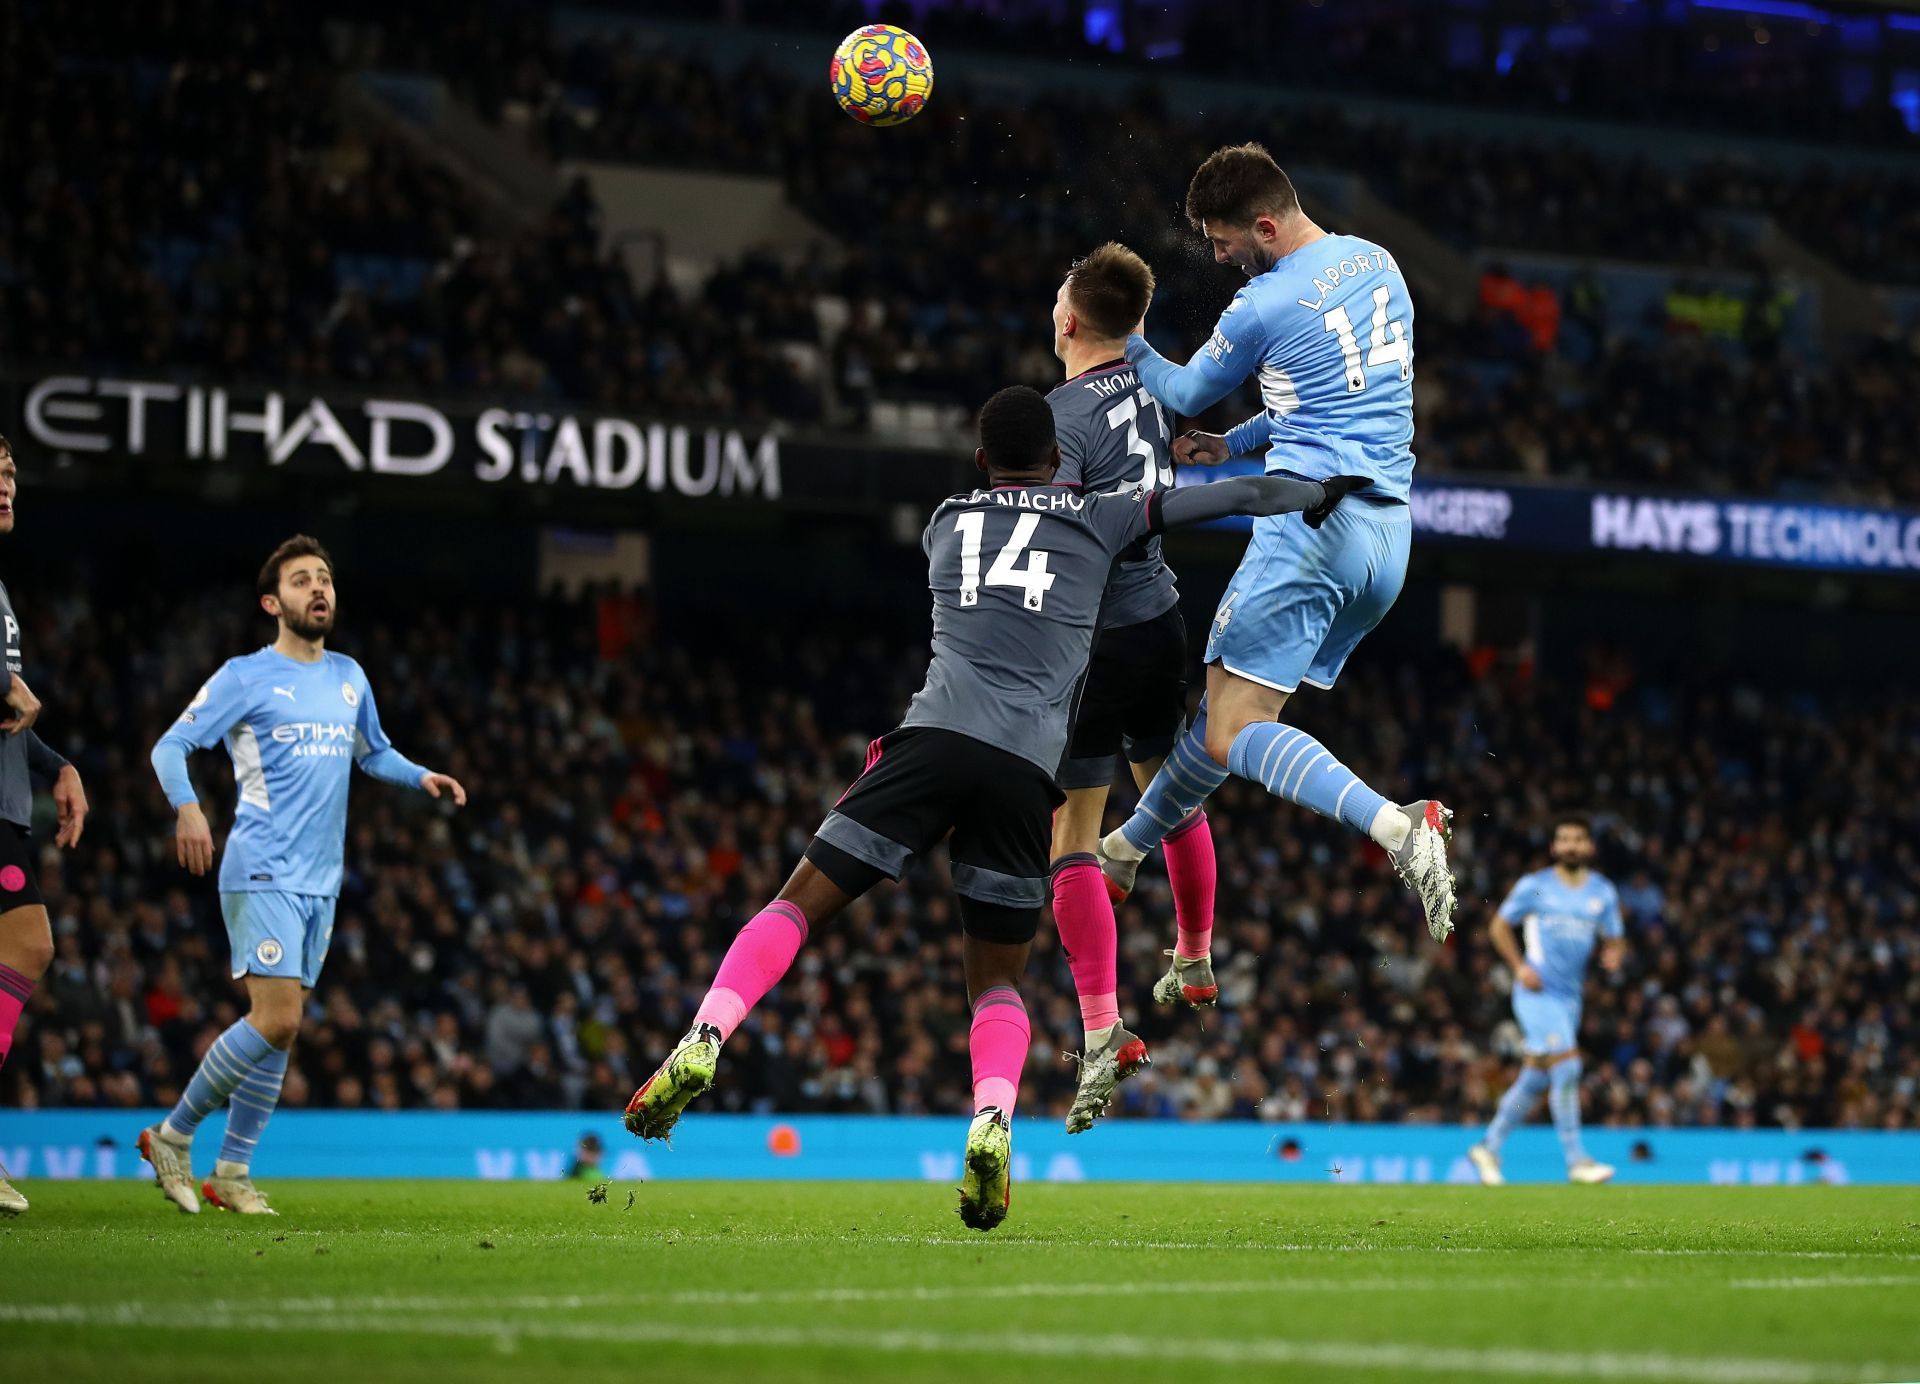 Aymeric Laporte scored City&#039;s 5th goal which calmed the nerves at the Etihad in a roller coaster game